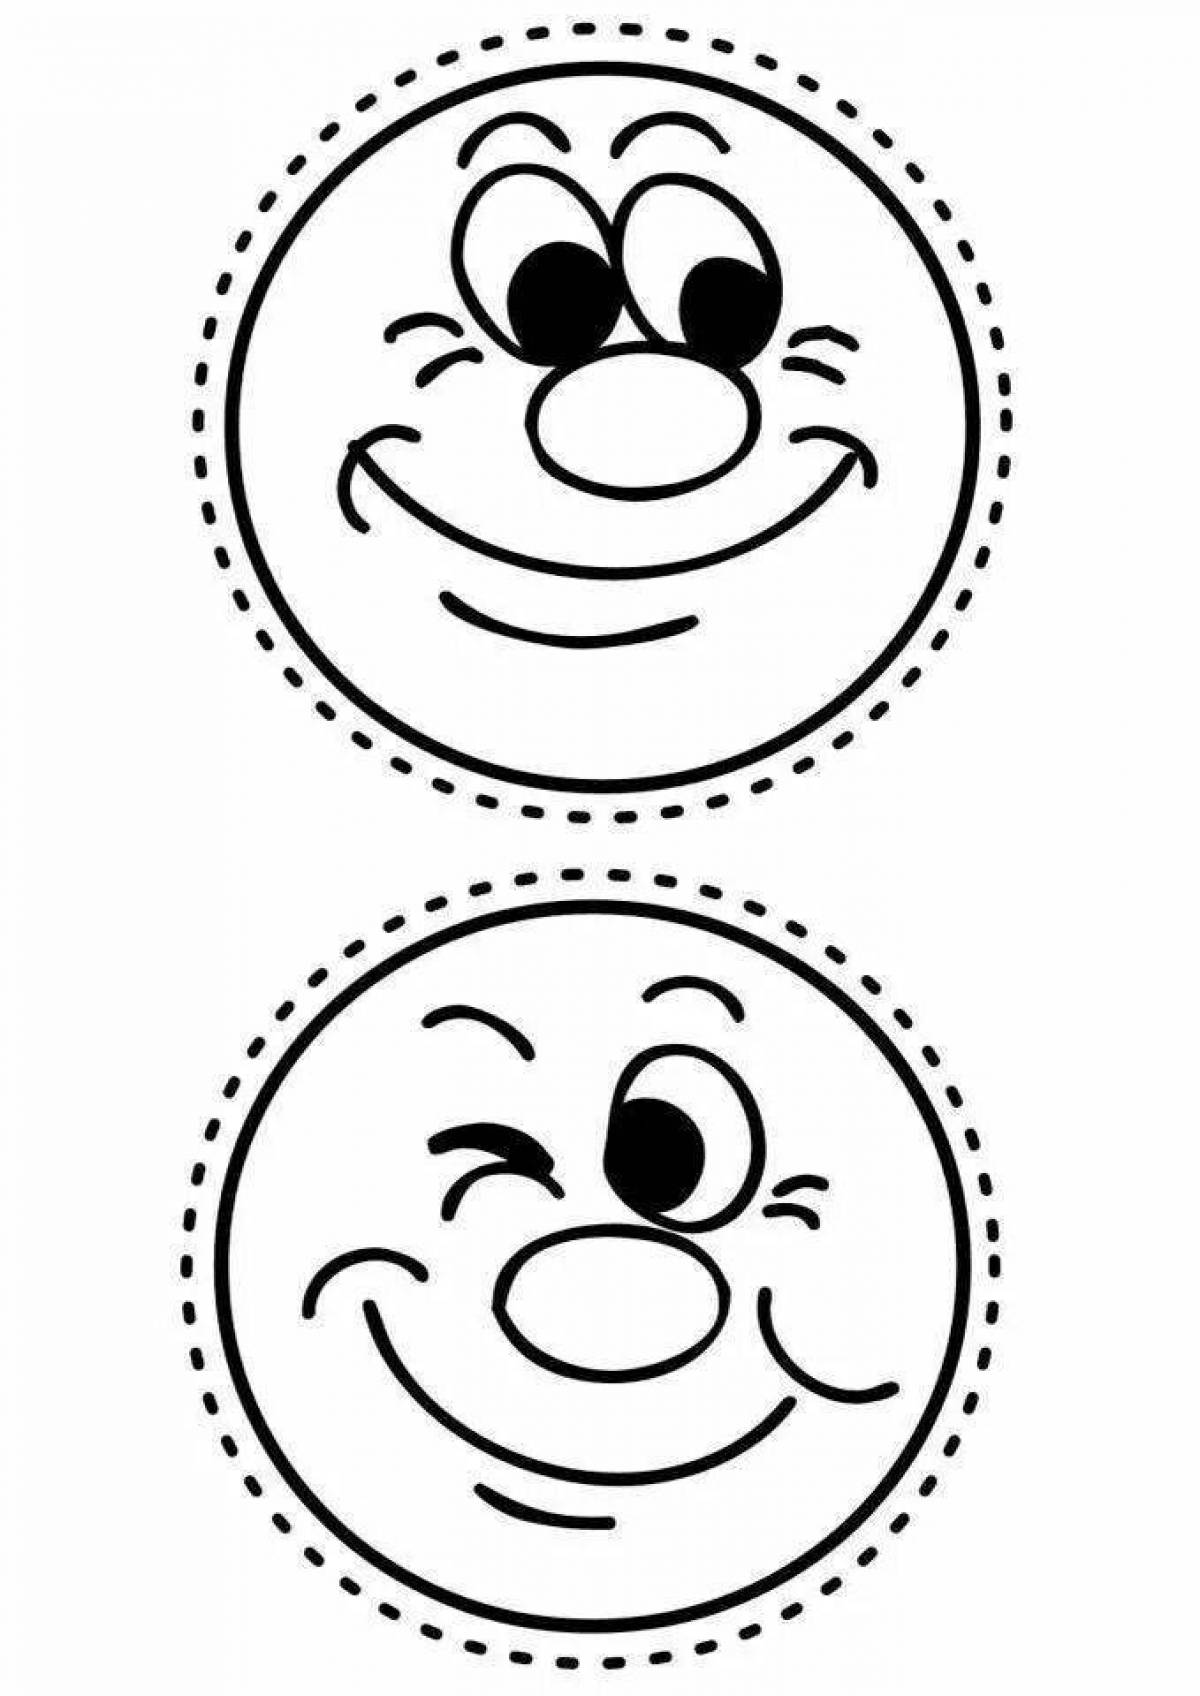 Attractive emoji coloring page for kids